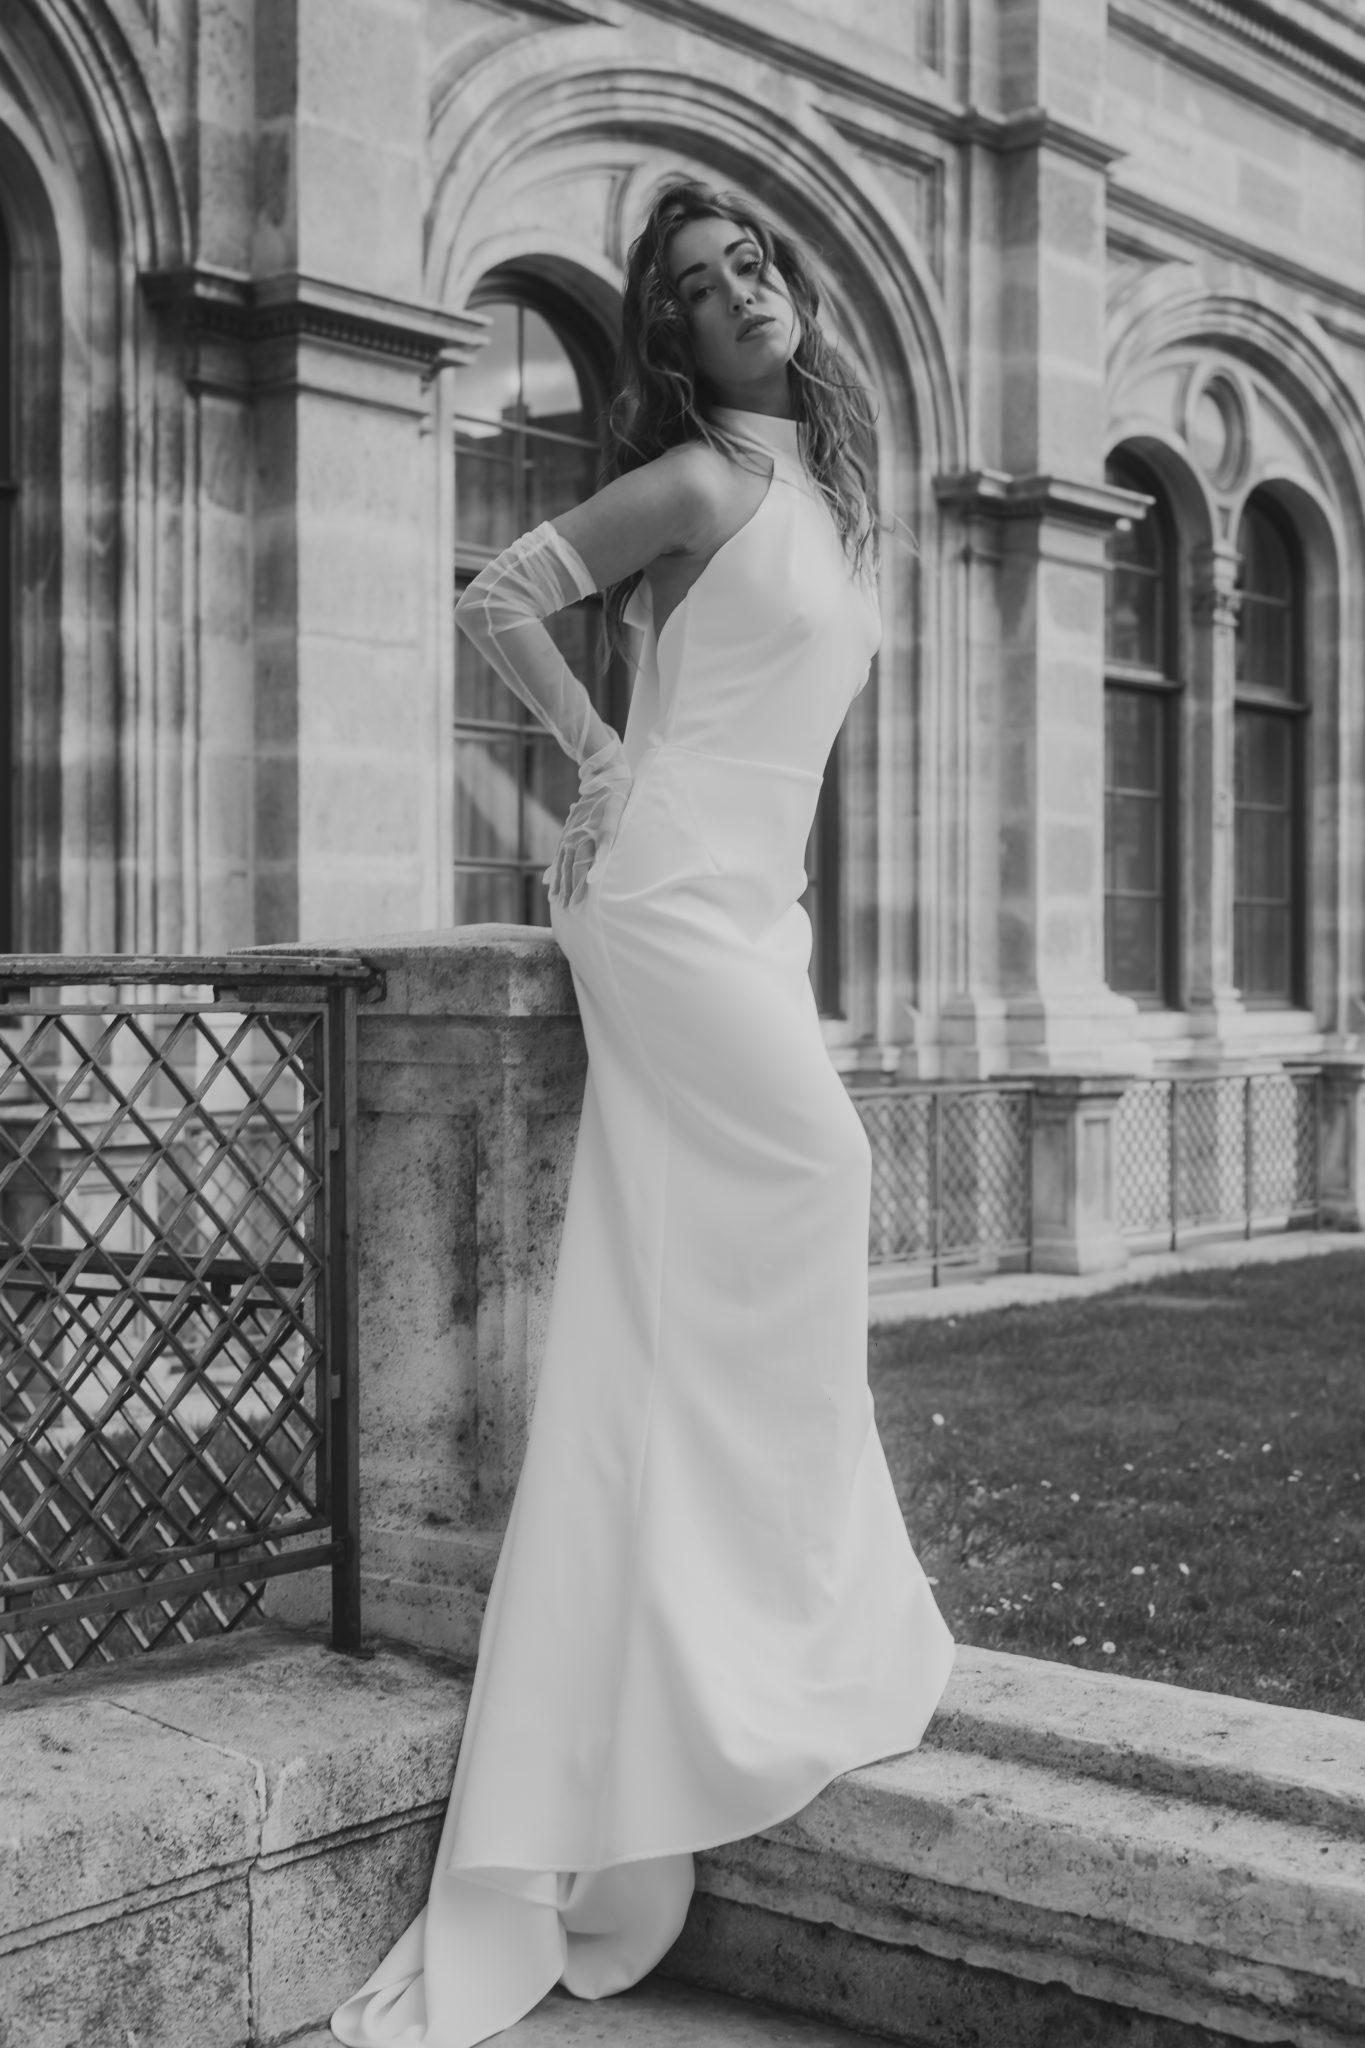 Editorial photo of a bride striking a pose in front of architecture in Vienna